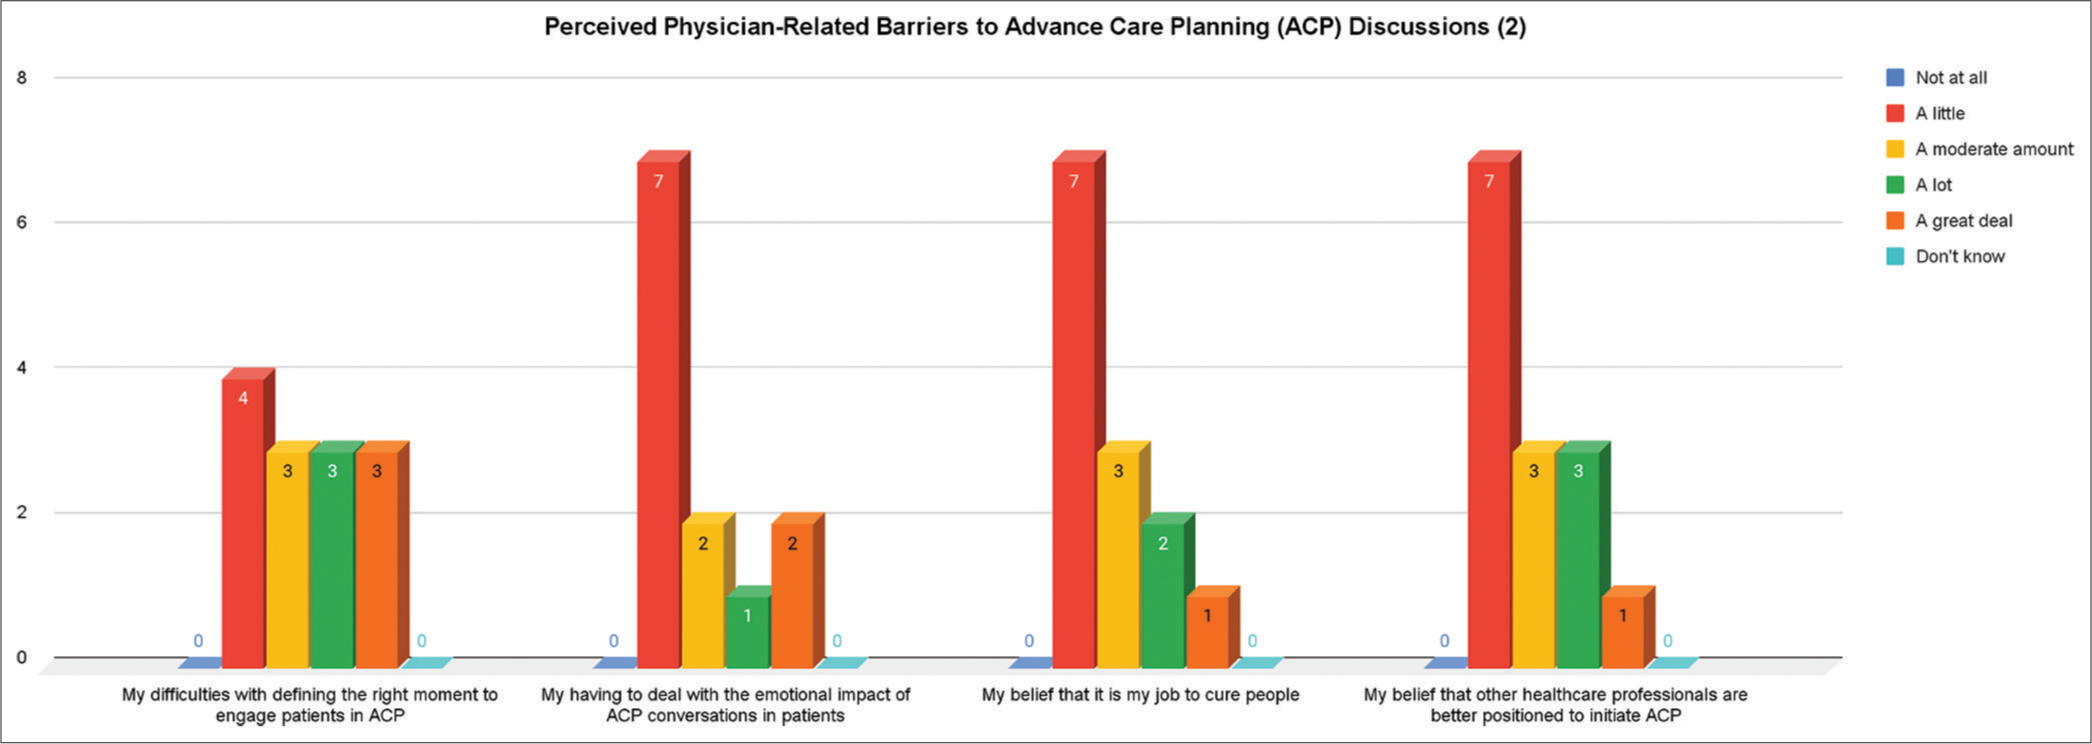 Perceived physician-related barriers to advance care planning (ACP) discussions (2) Second set of items for perceived physician-related barriers. The items are many and were split into three charts.